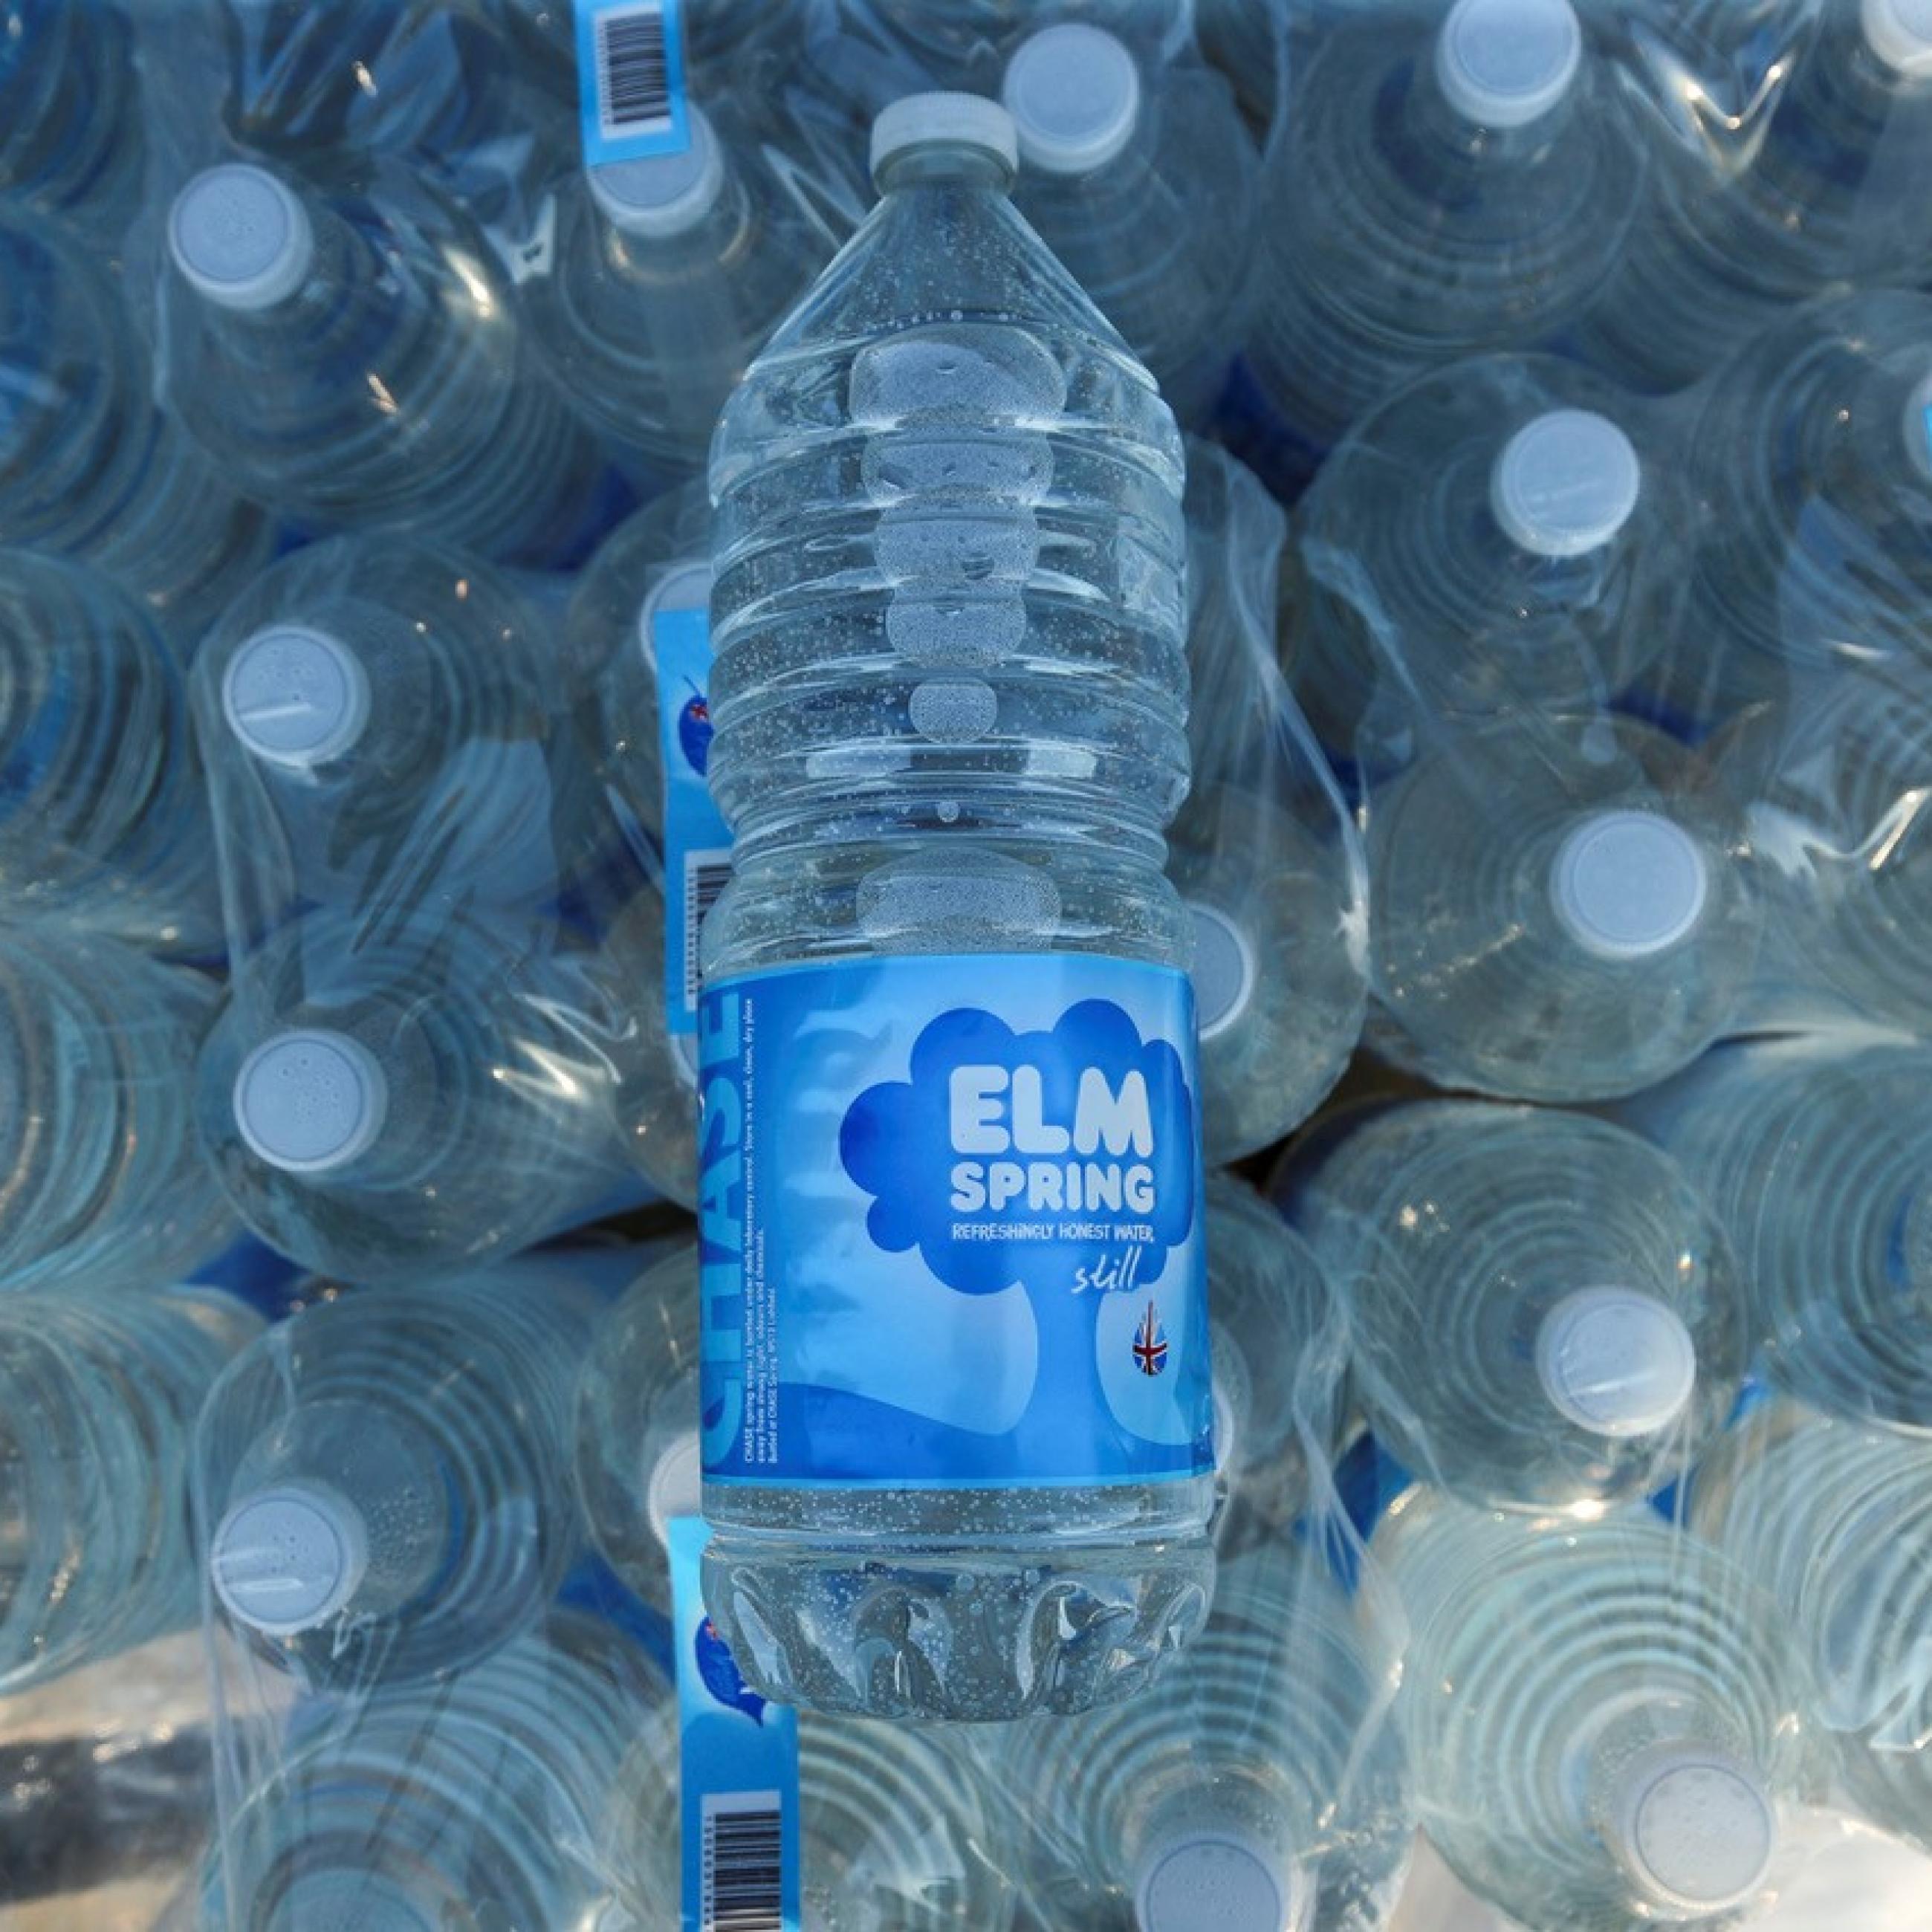 A view from above of dozens of bottles of water with blue labels and white caps.